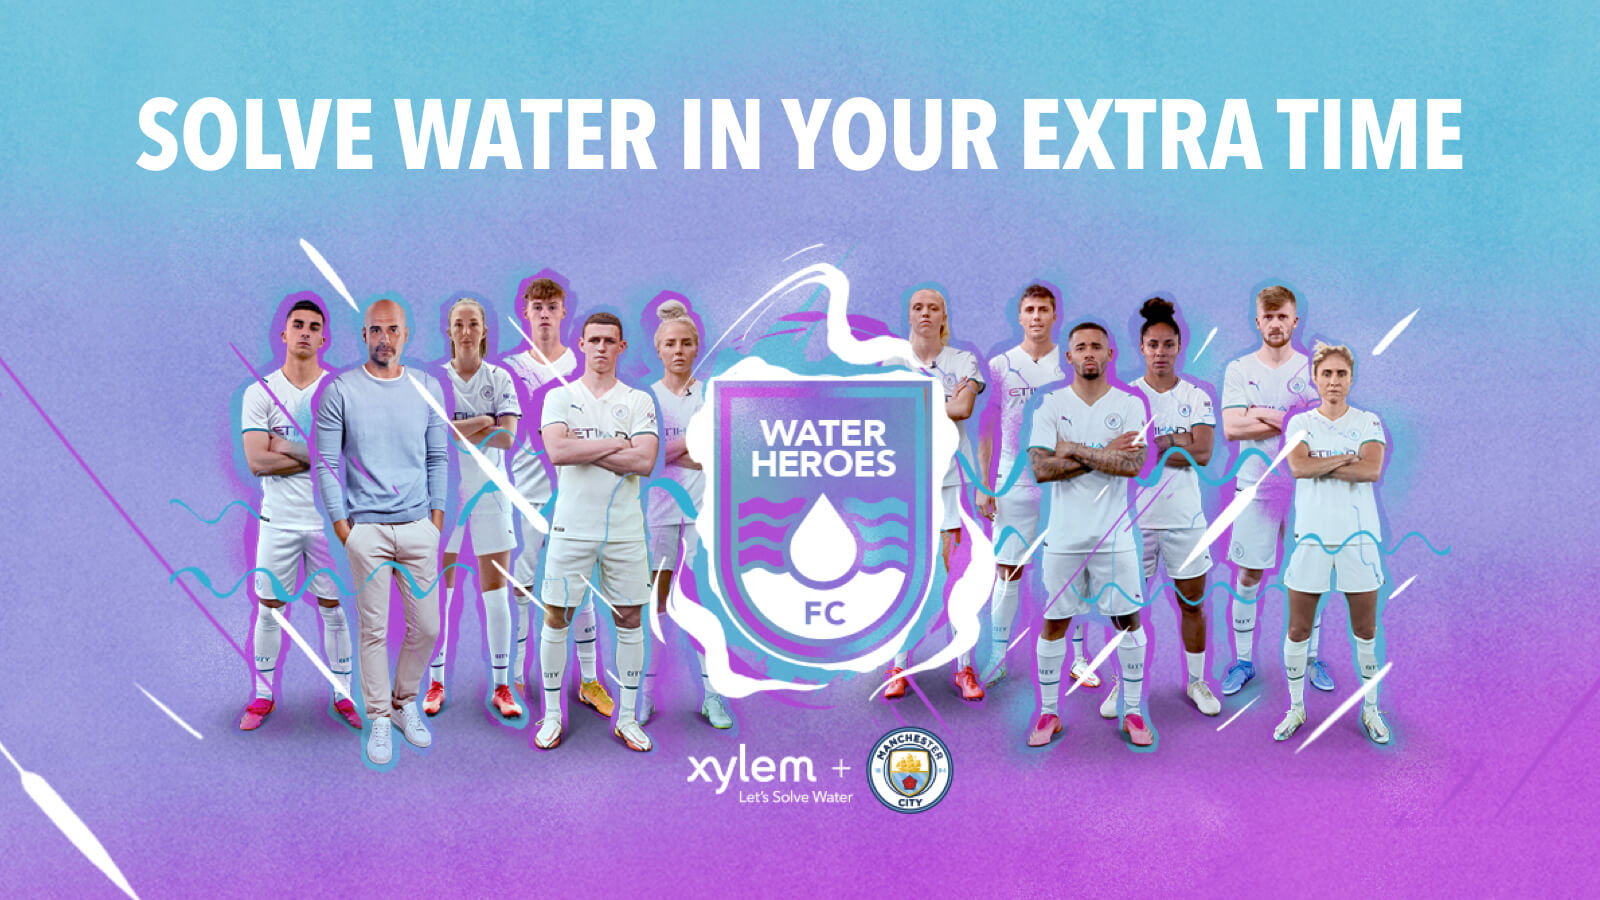 Music for Man City and Water Heroes FC